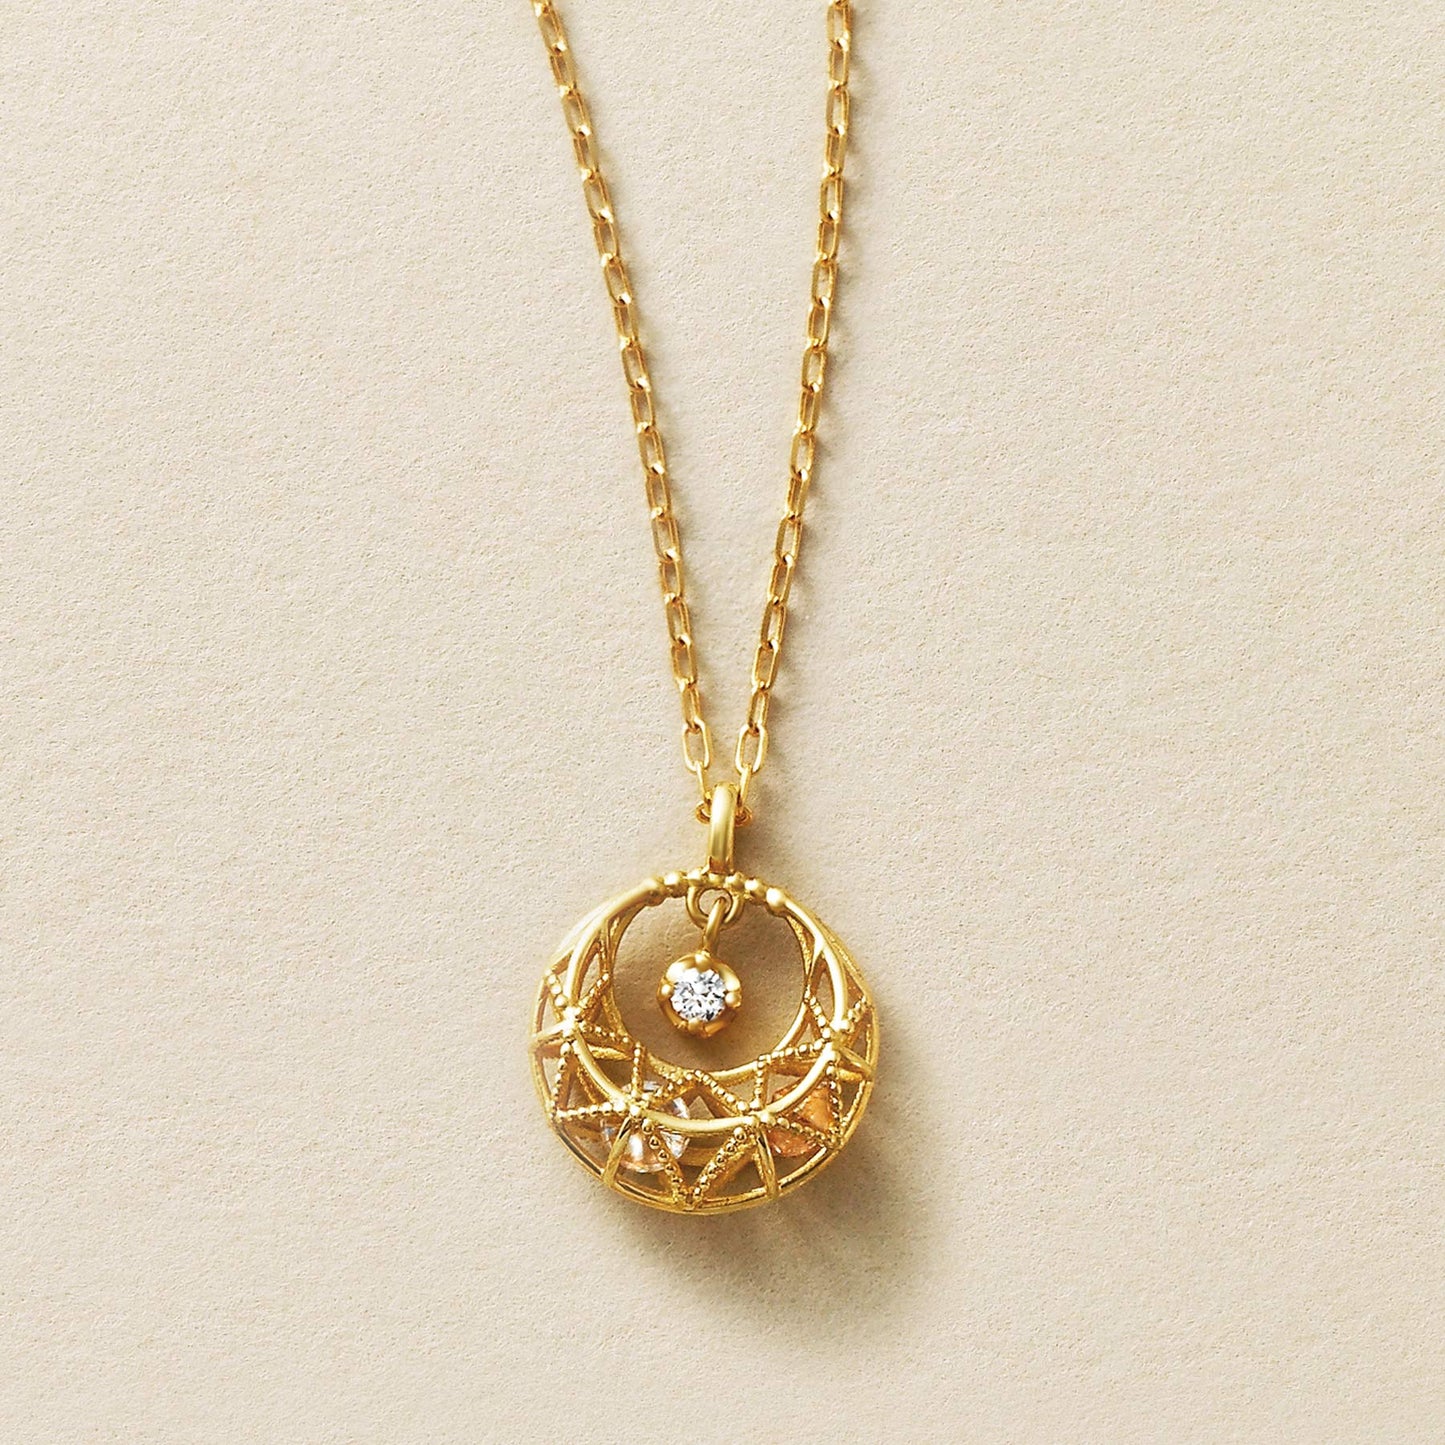 [Pannier] 18K Yellow Gold Crescent Necklace - Product Image